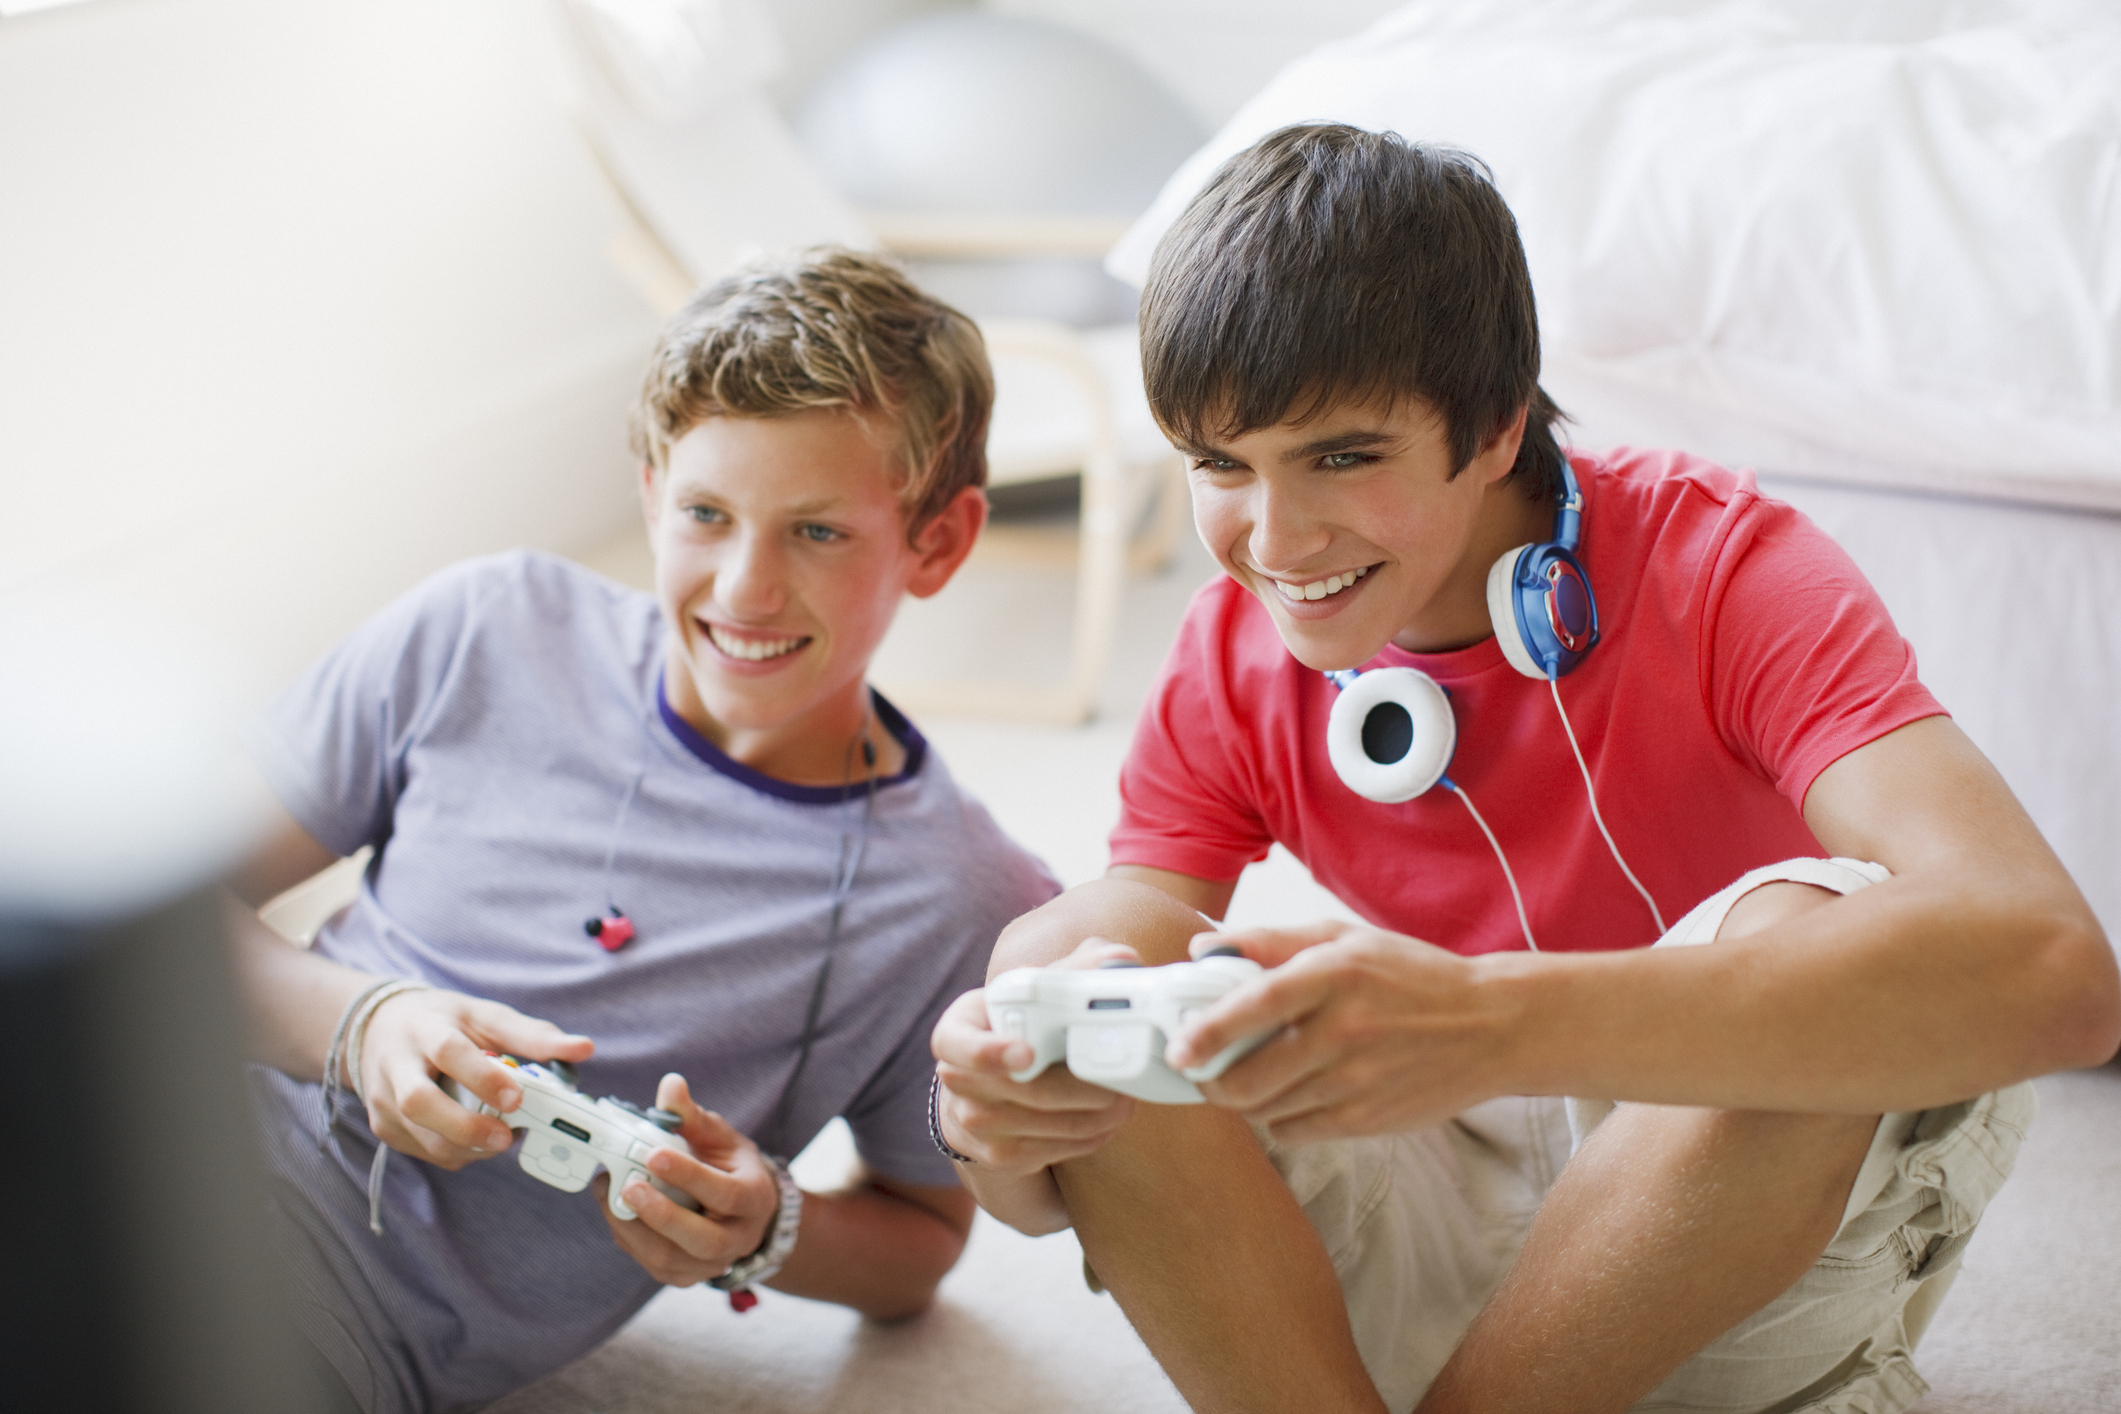 Playing video games appears to have no significant influence on